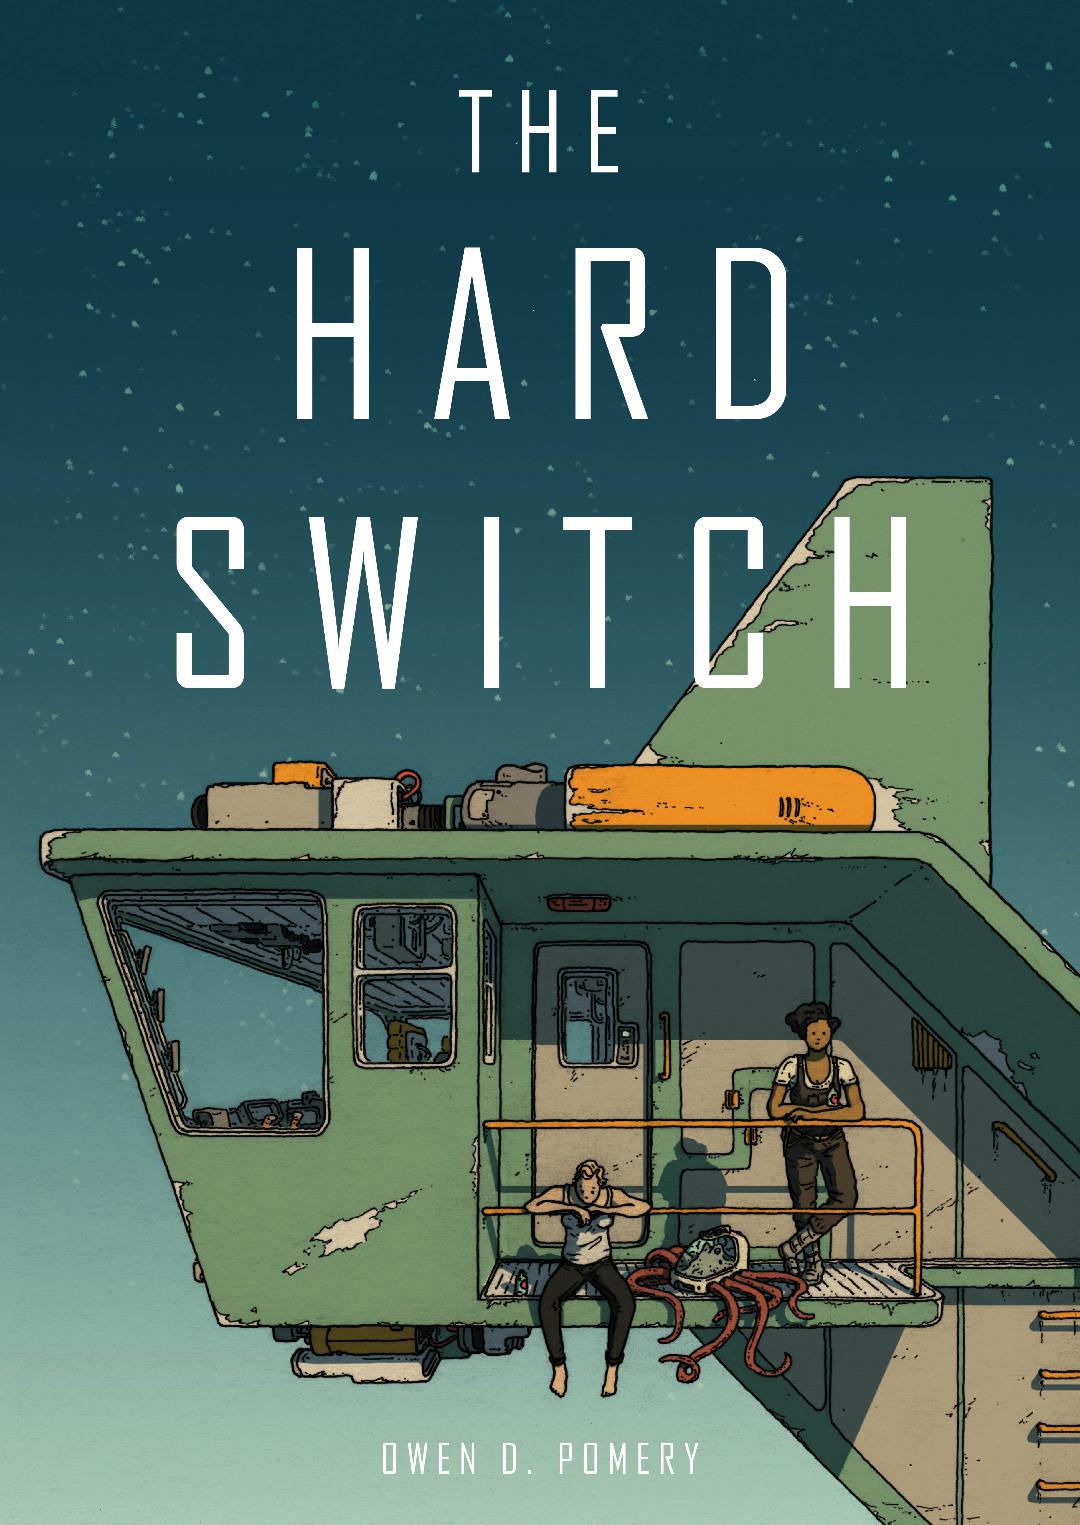 The Hard Switch by Owen D. Pomery (Paperback Edition) - Preorder